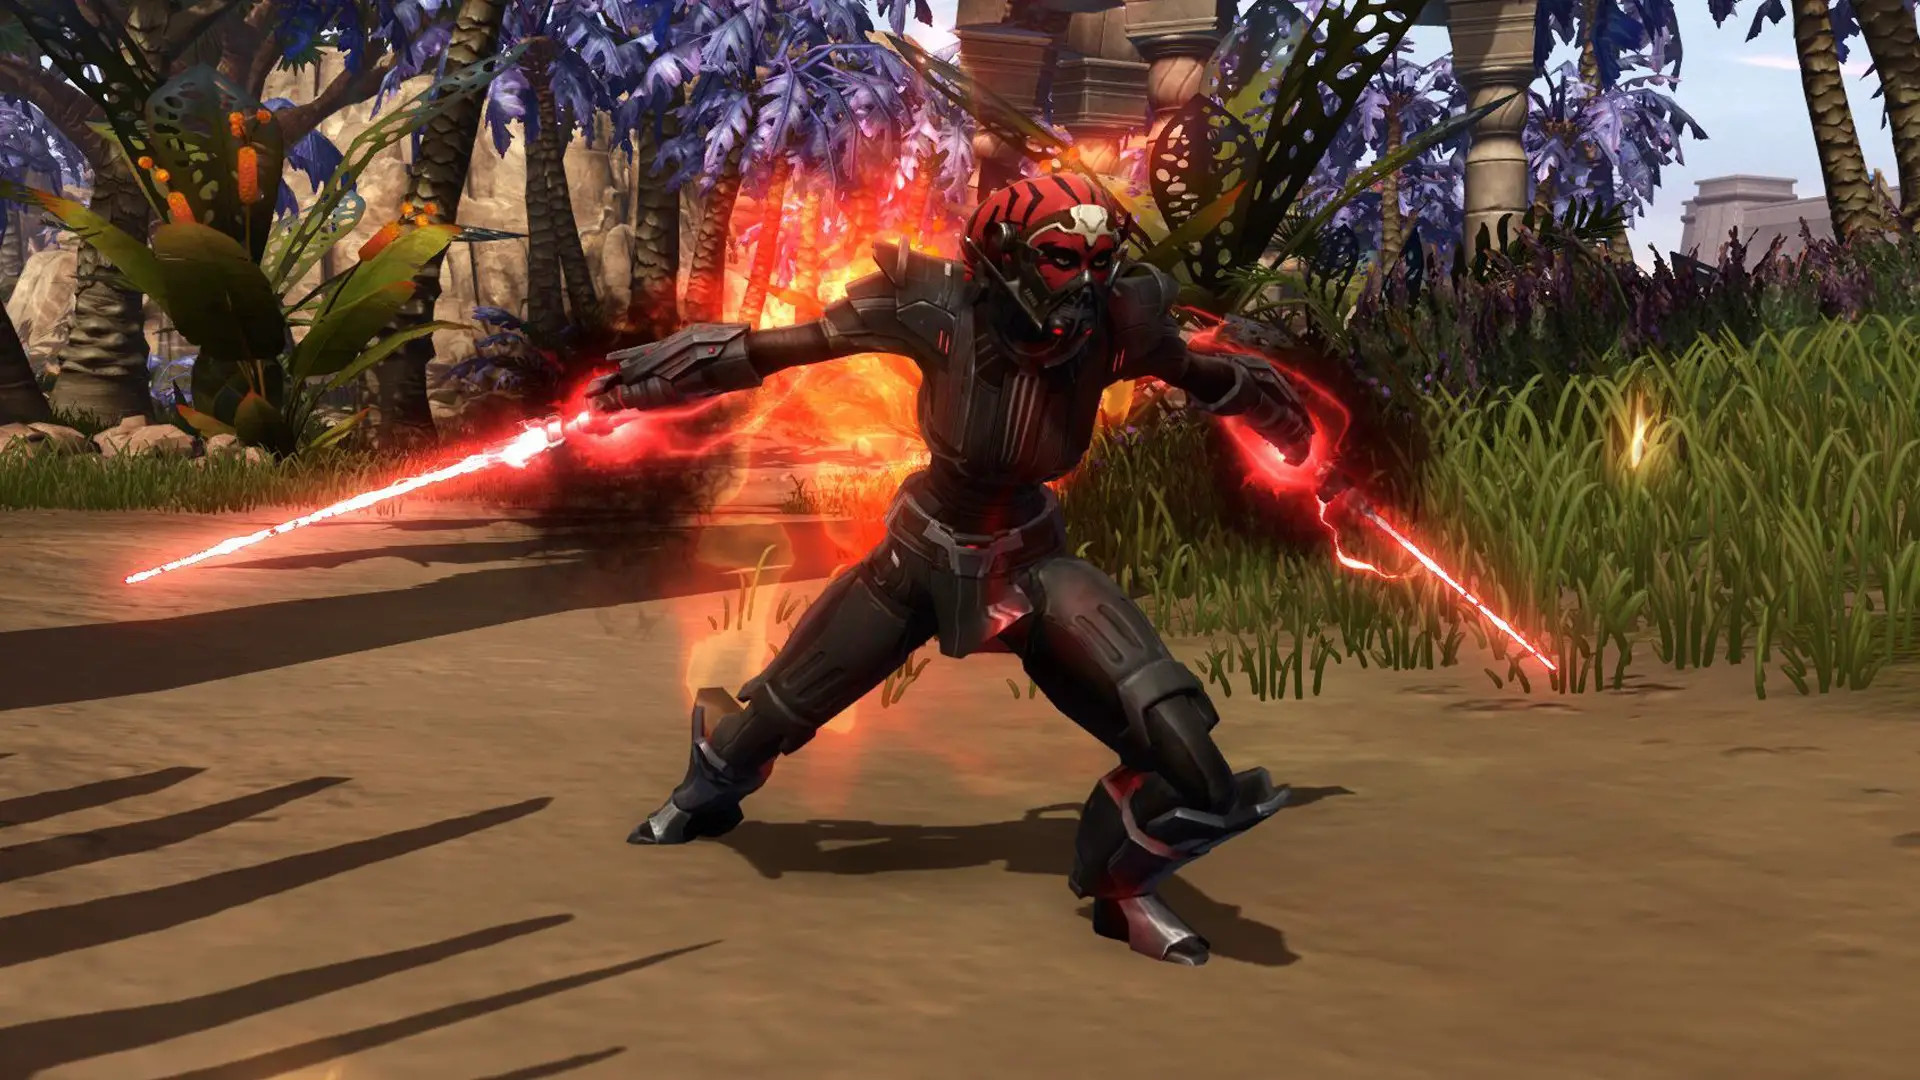 Star Wars: The Old Republic Embraces Cloud Technology for New Server Experience | Gametides